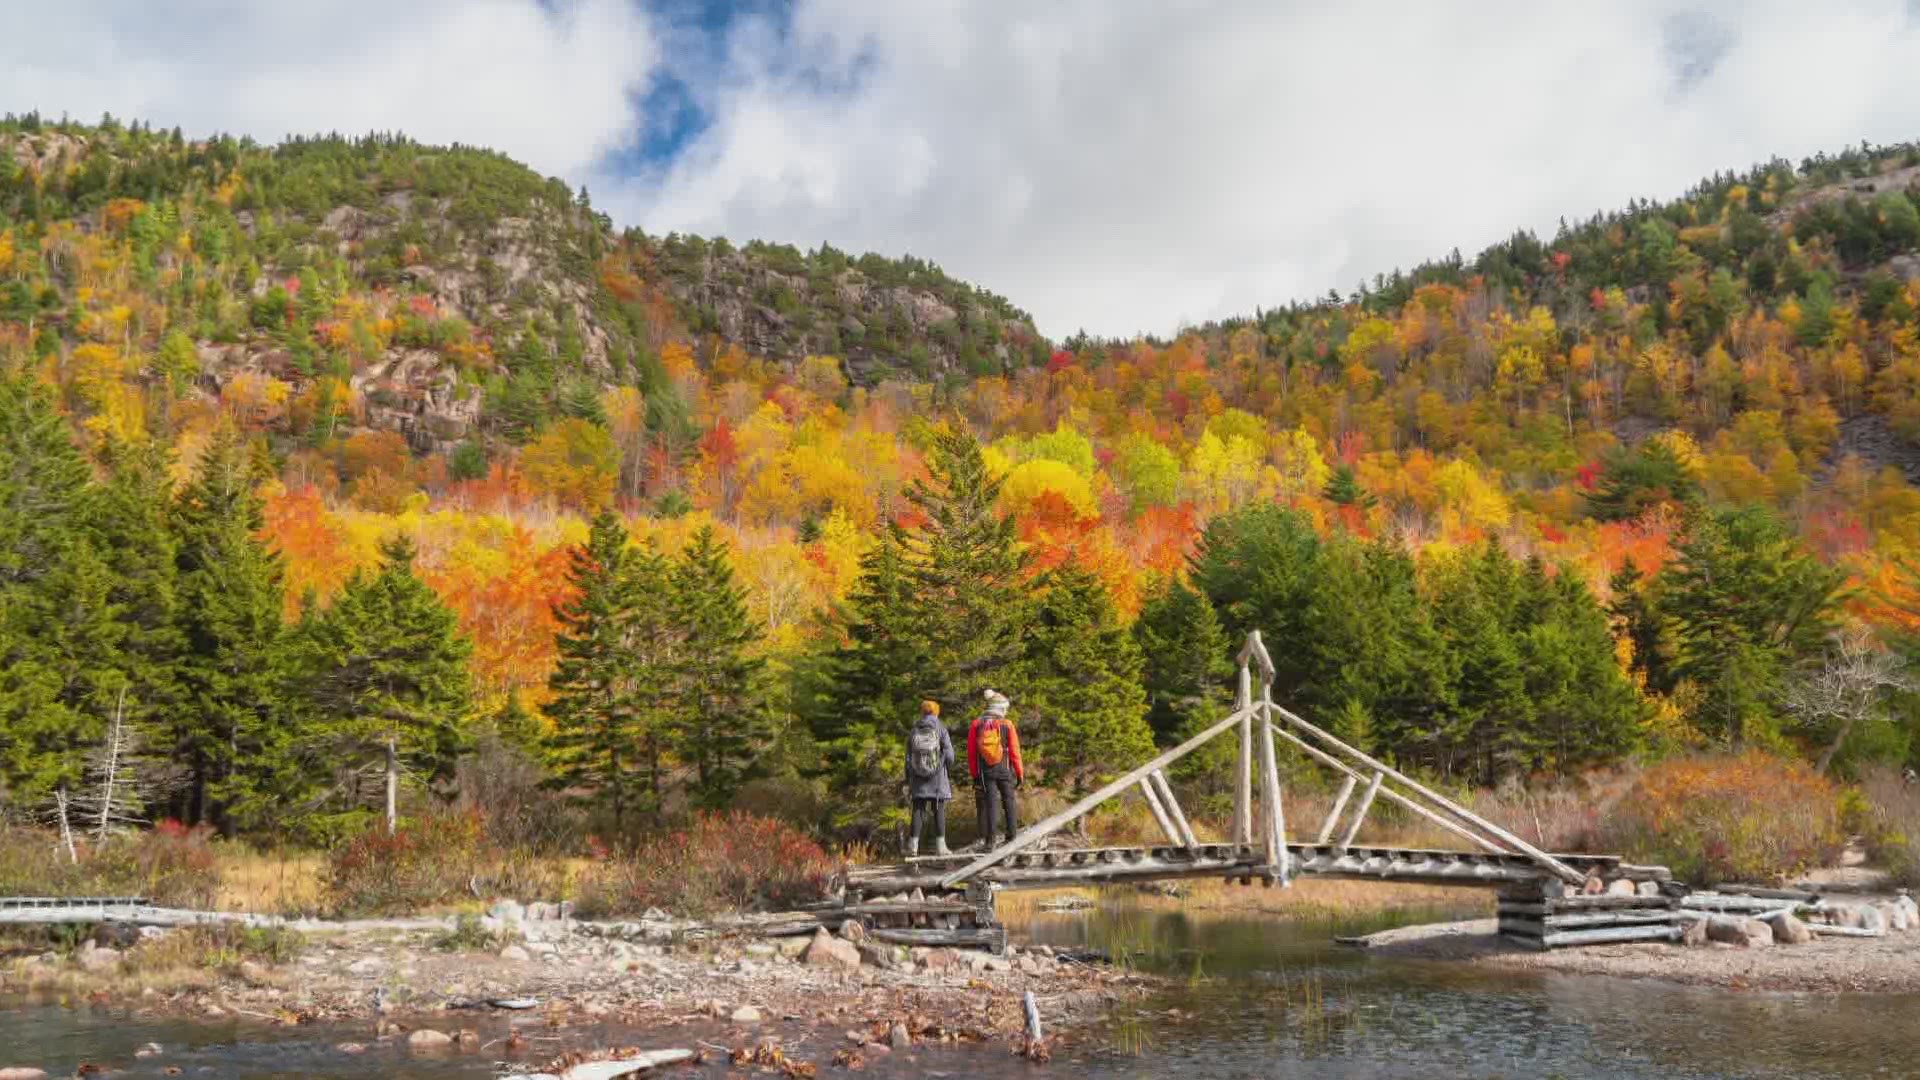 “Down East” takes an admiring look at autumn in Acadia